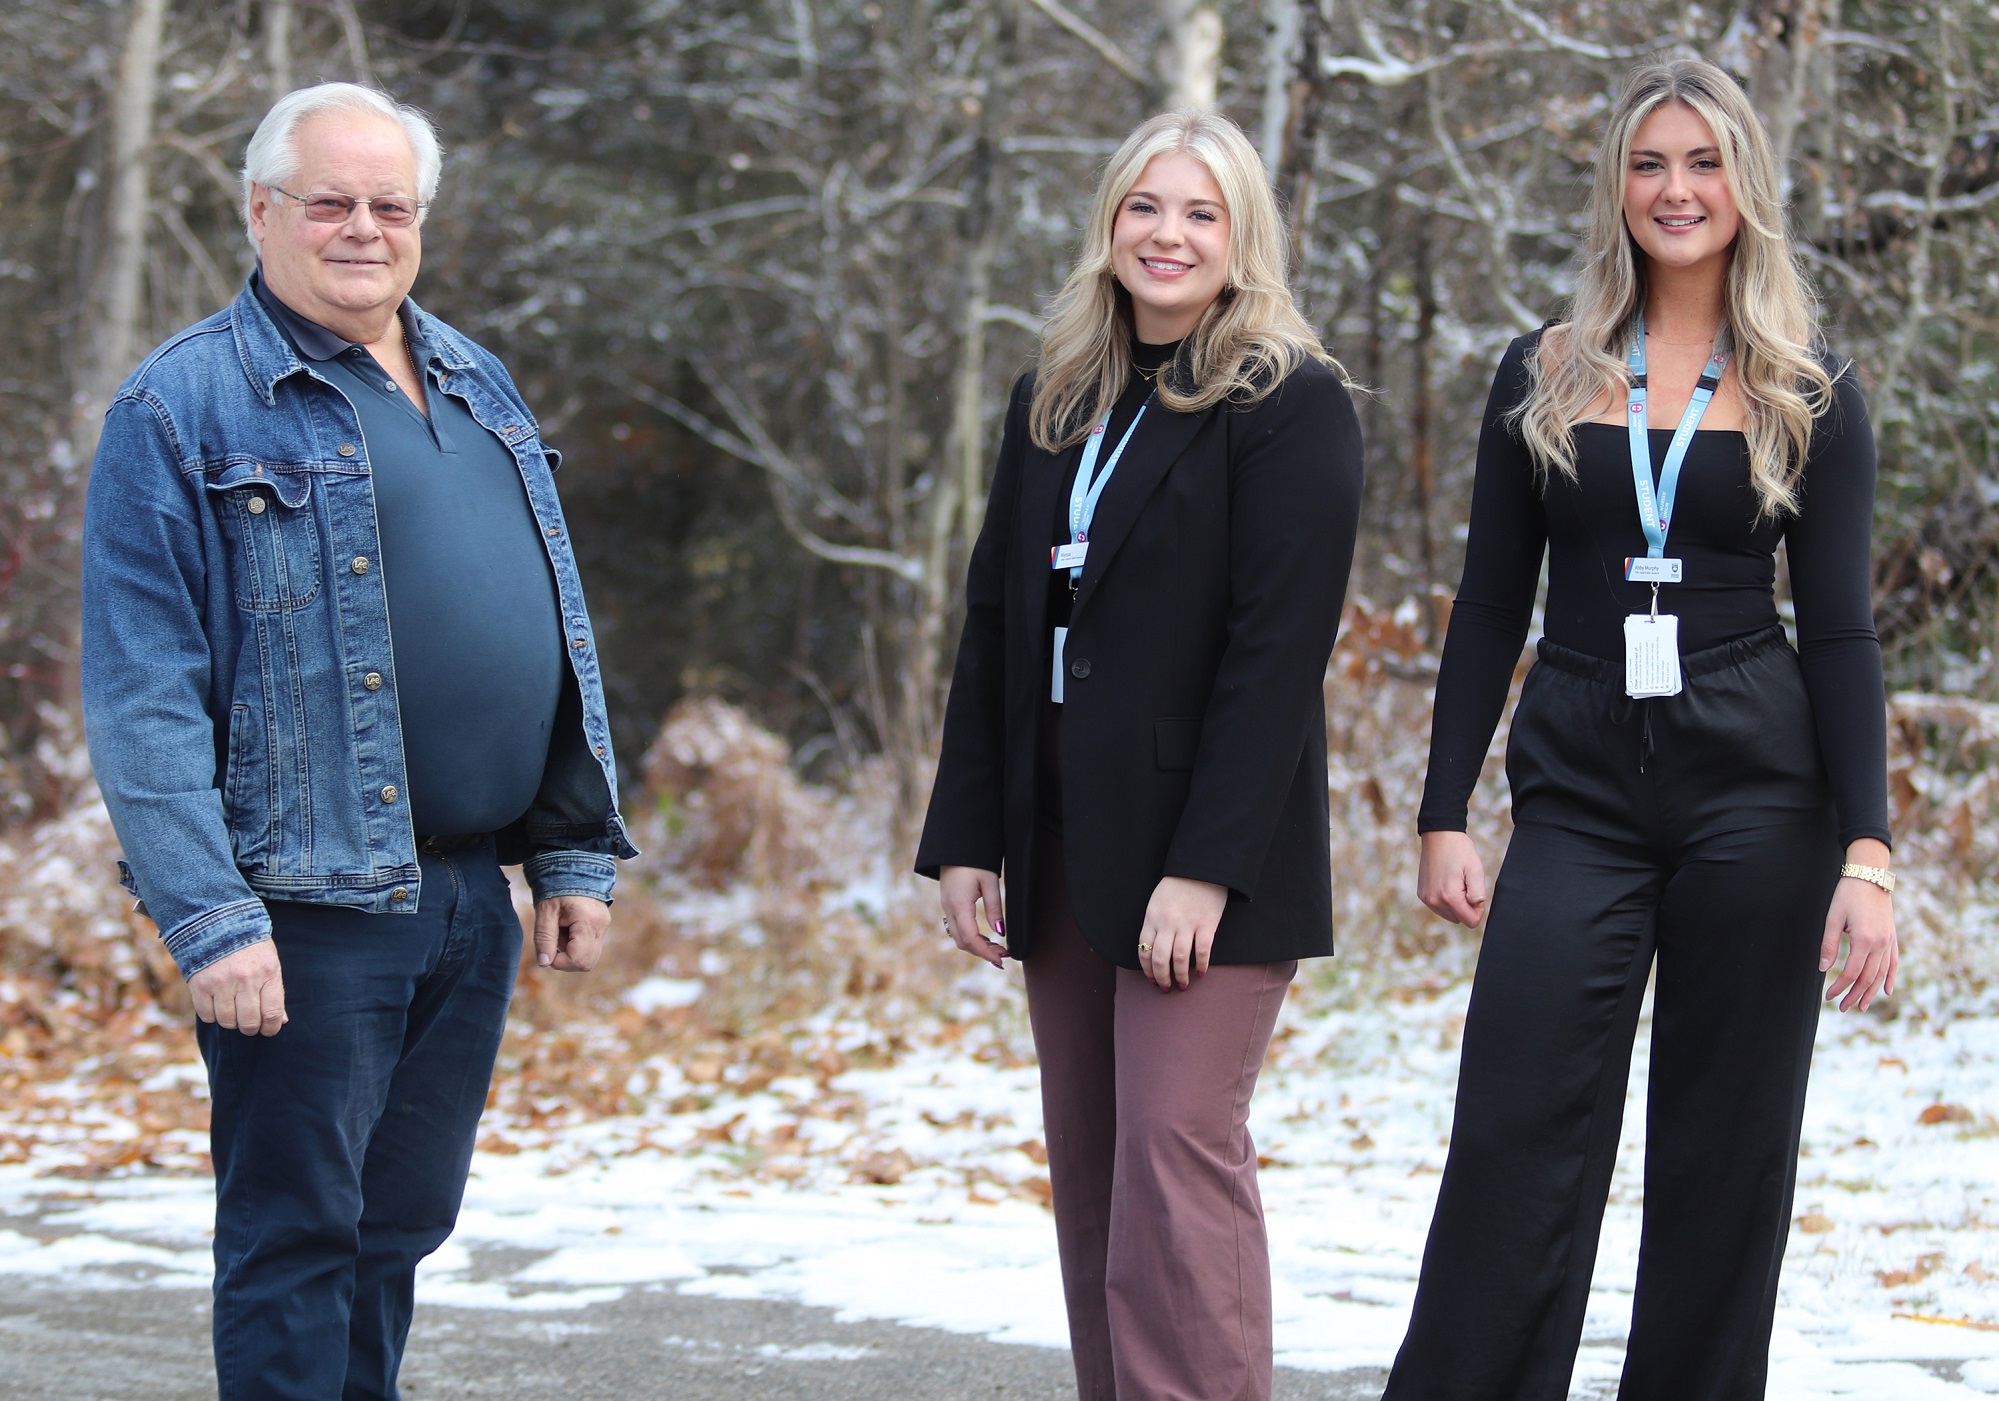 Selkirk College nursing students tackle homelessness/toxic drug use while learning